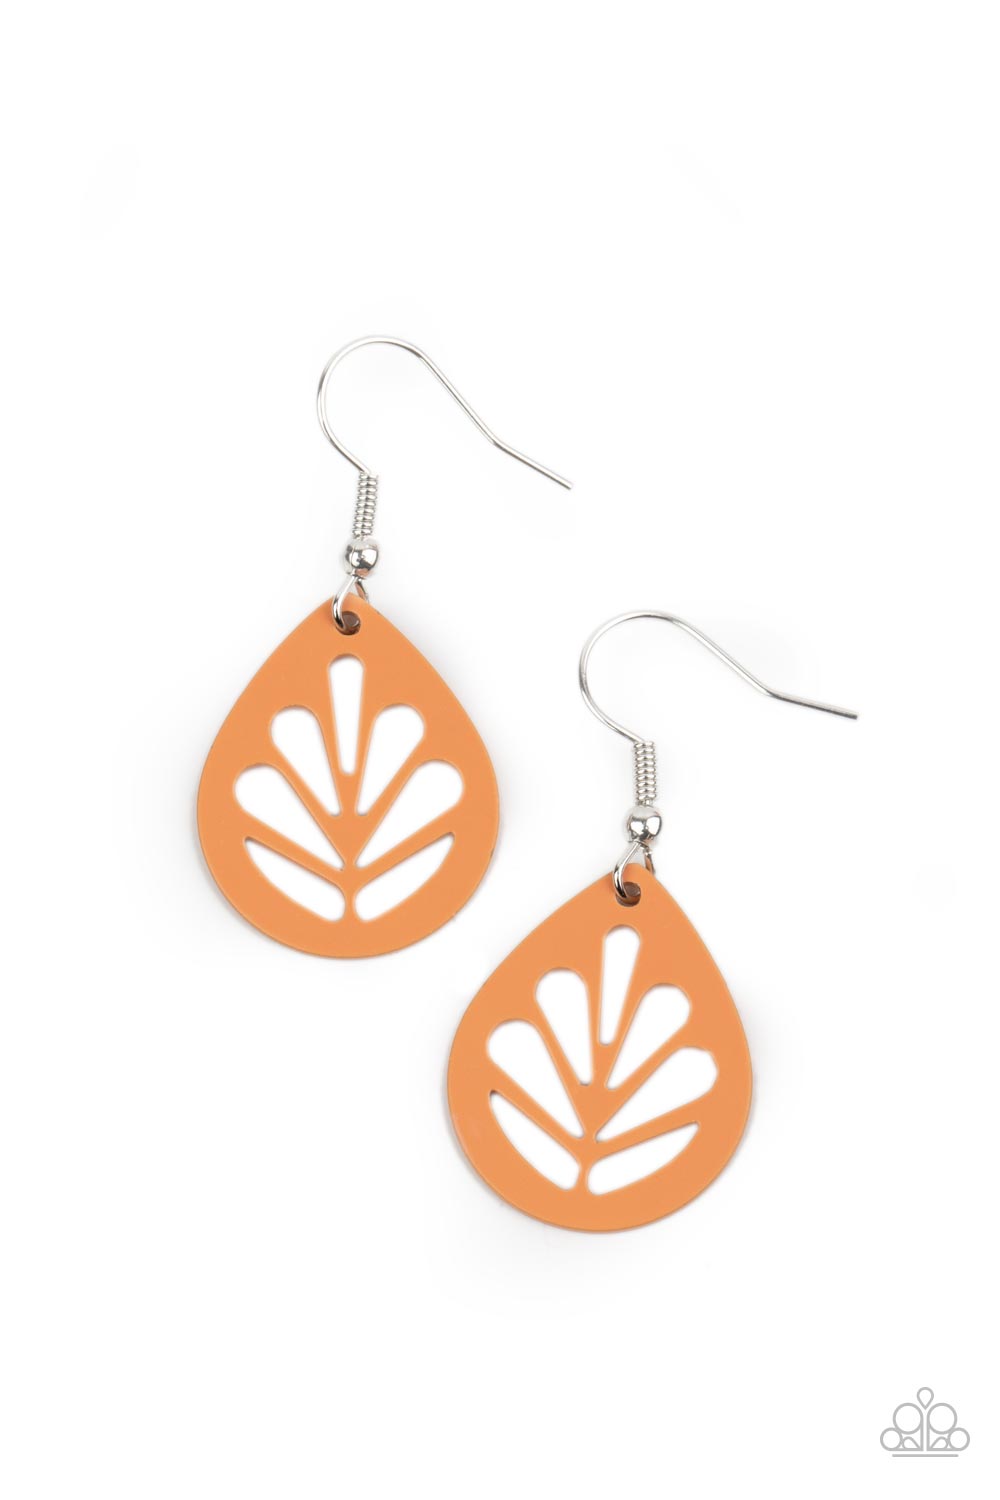 LEAF Yourself Wide Open Orange Leaf Earrings - Paparazzi Accessories- lightbox - CarasShop.com - $5 Jewelry by Cara Jewels